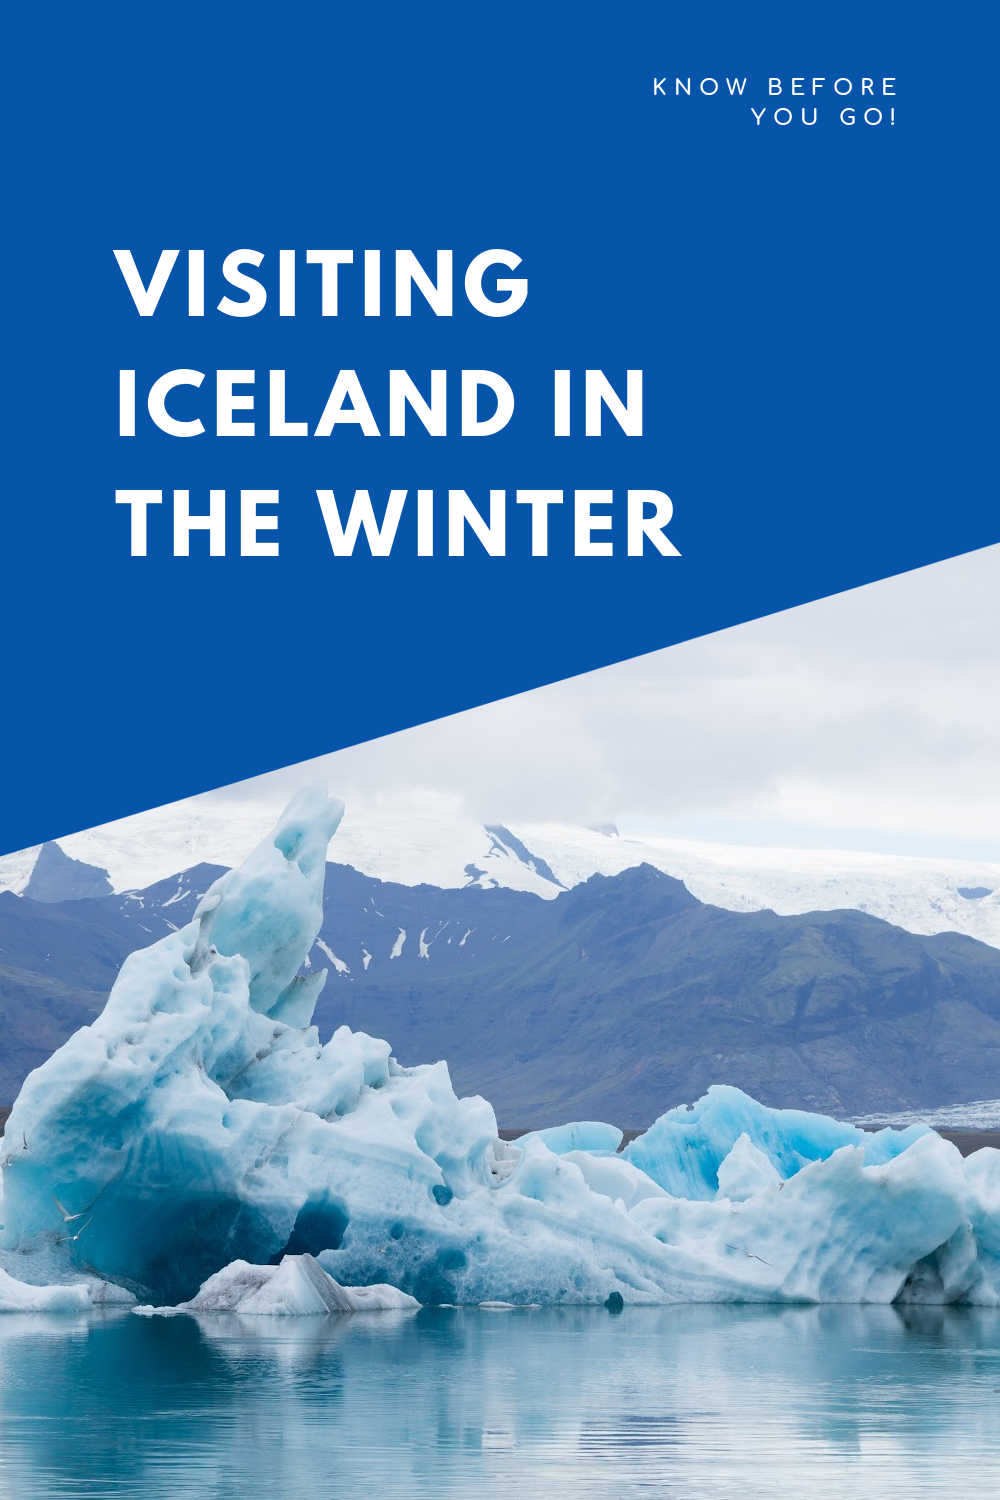 VISITING ICELAND IN THE WINTER